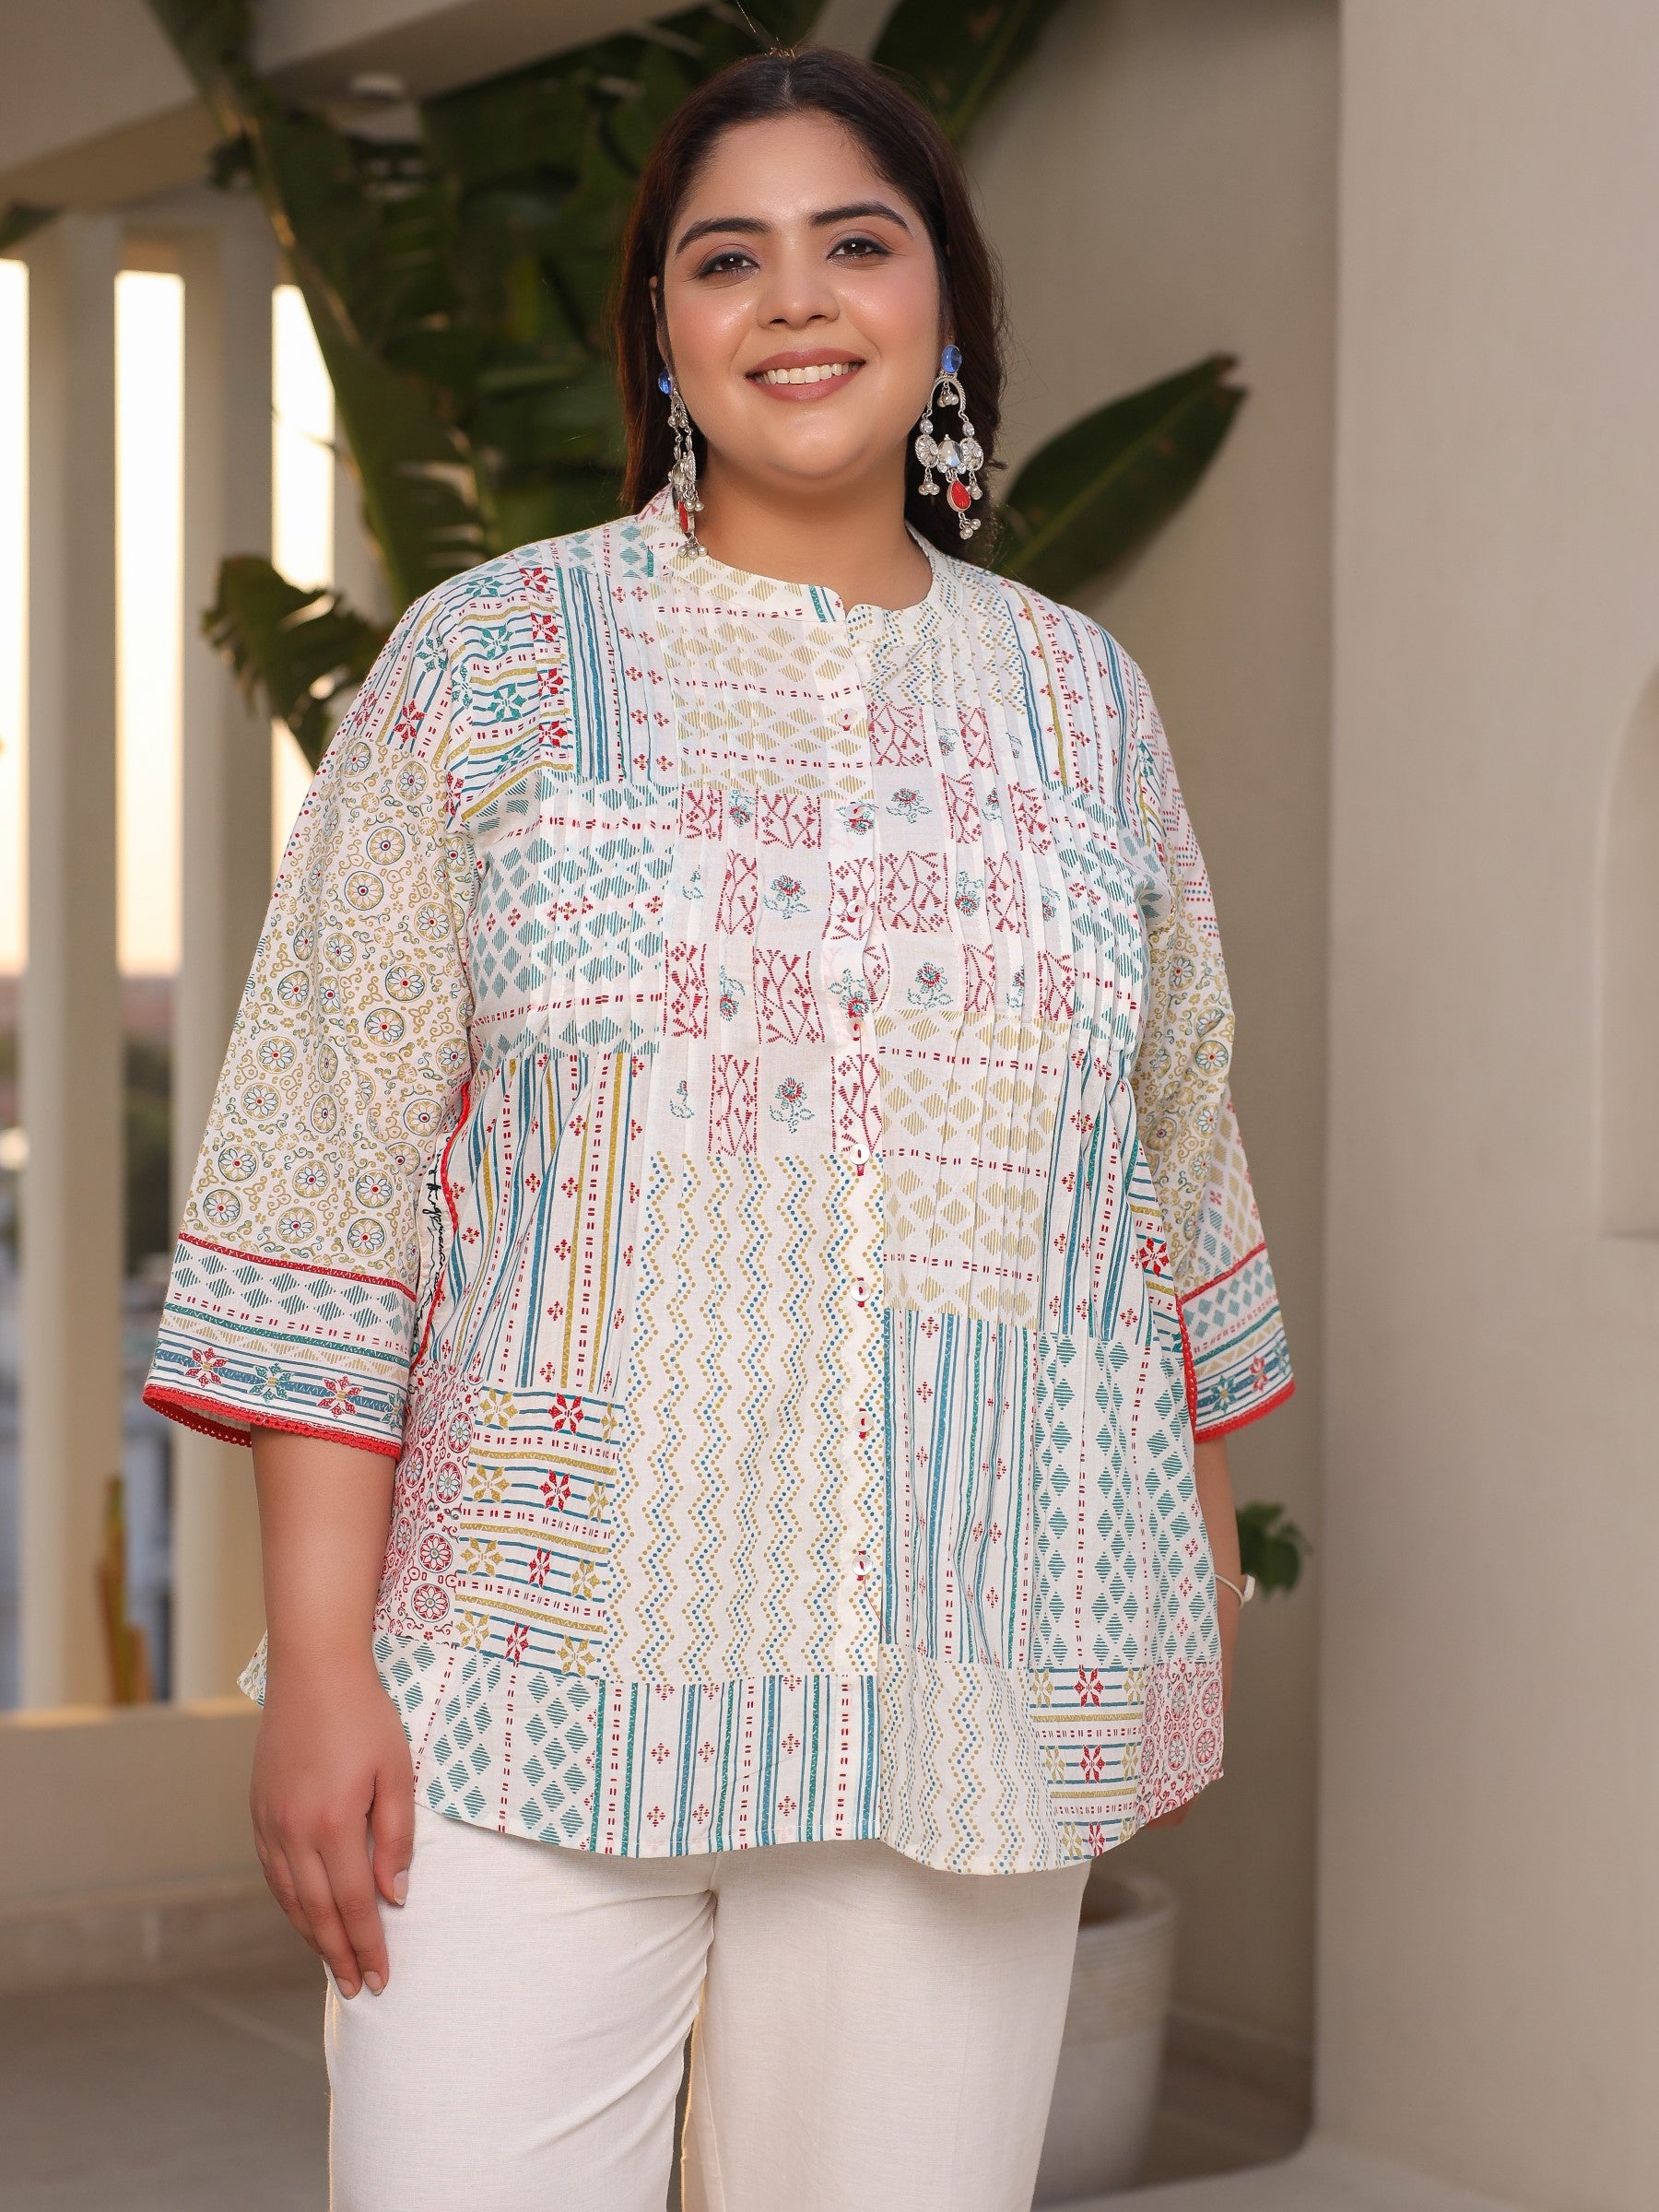 Off-White Ethnic Motif Printed Pleated Cotton Tunic & Pants Set With Pintucks At Front & Embroidery Details (2-Pcs)